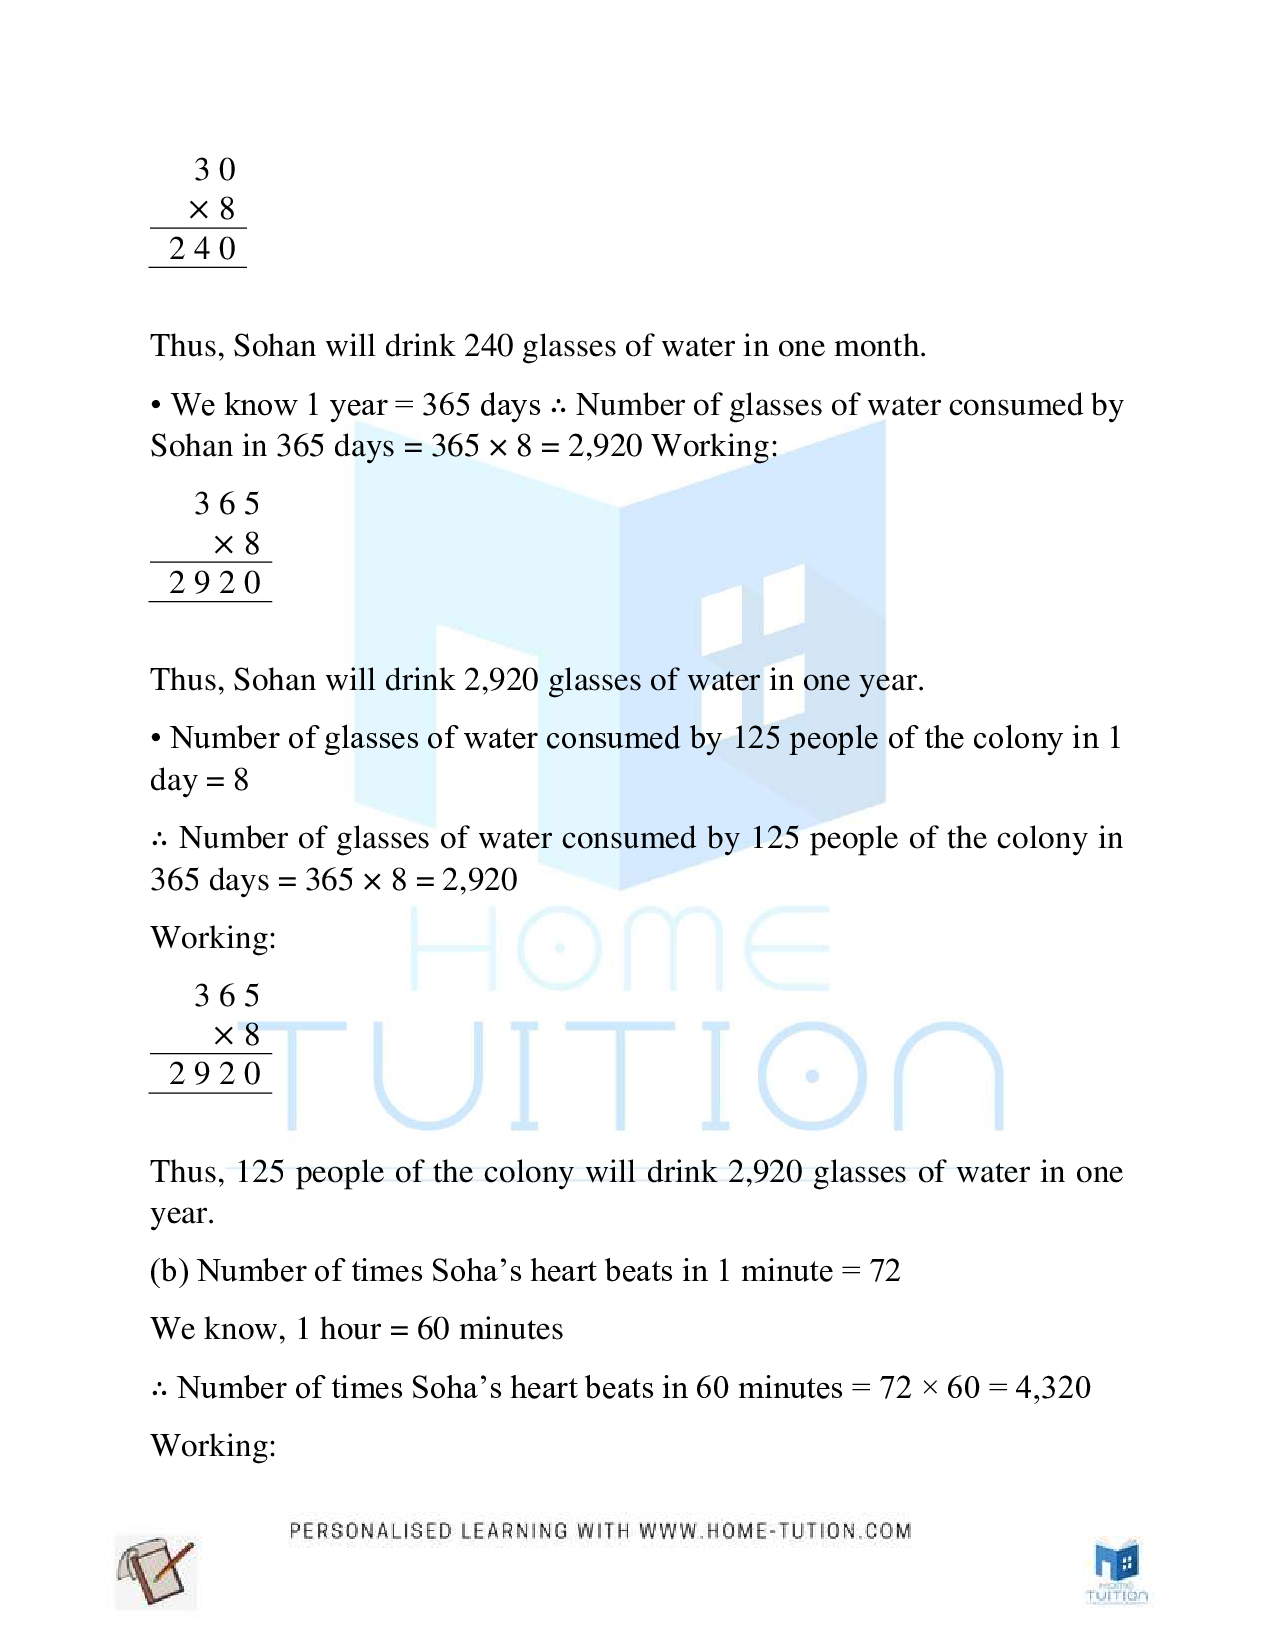 NCERT Class 5 Maths Chapter 13 Ways To Multiply And Divide